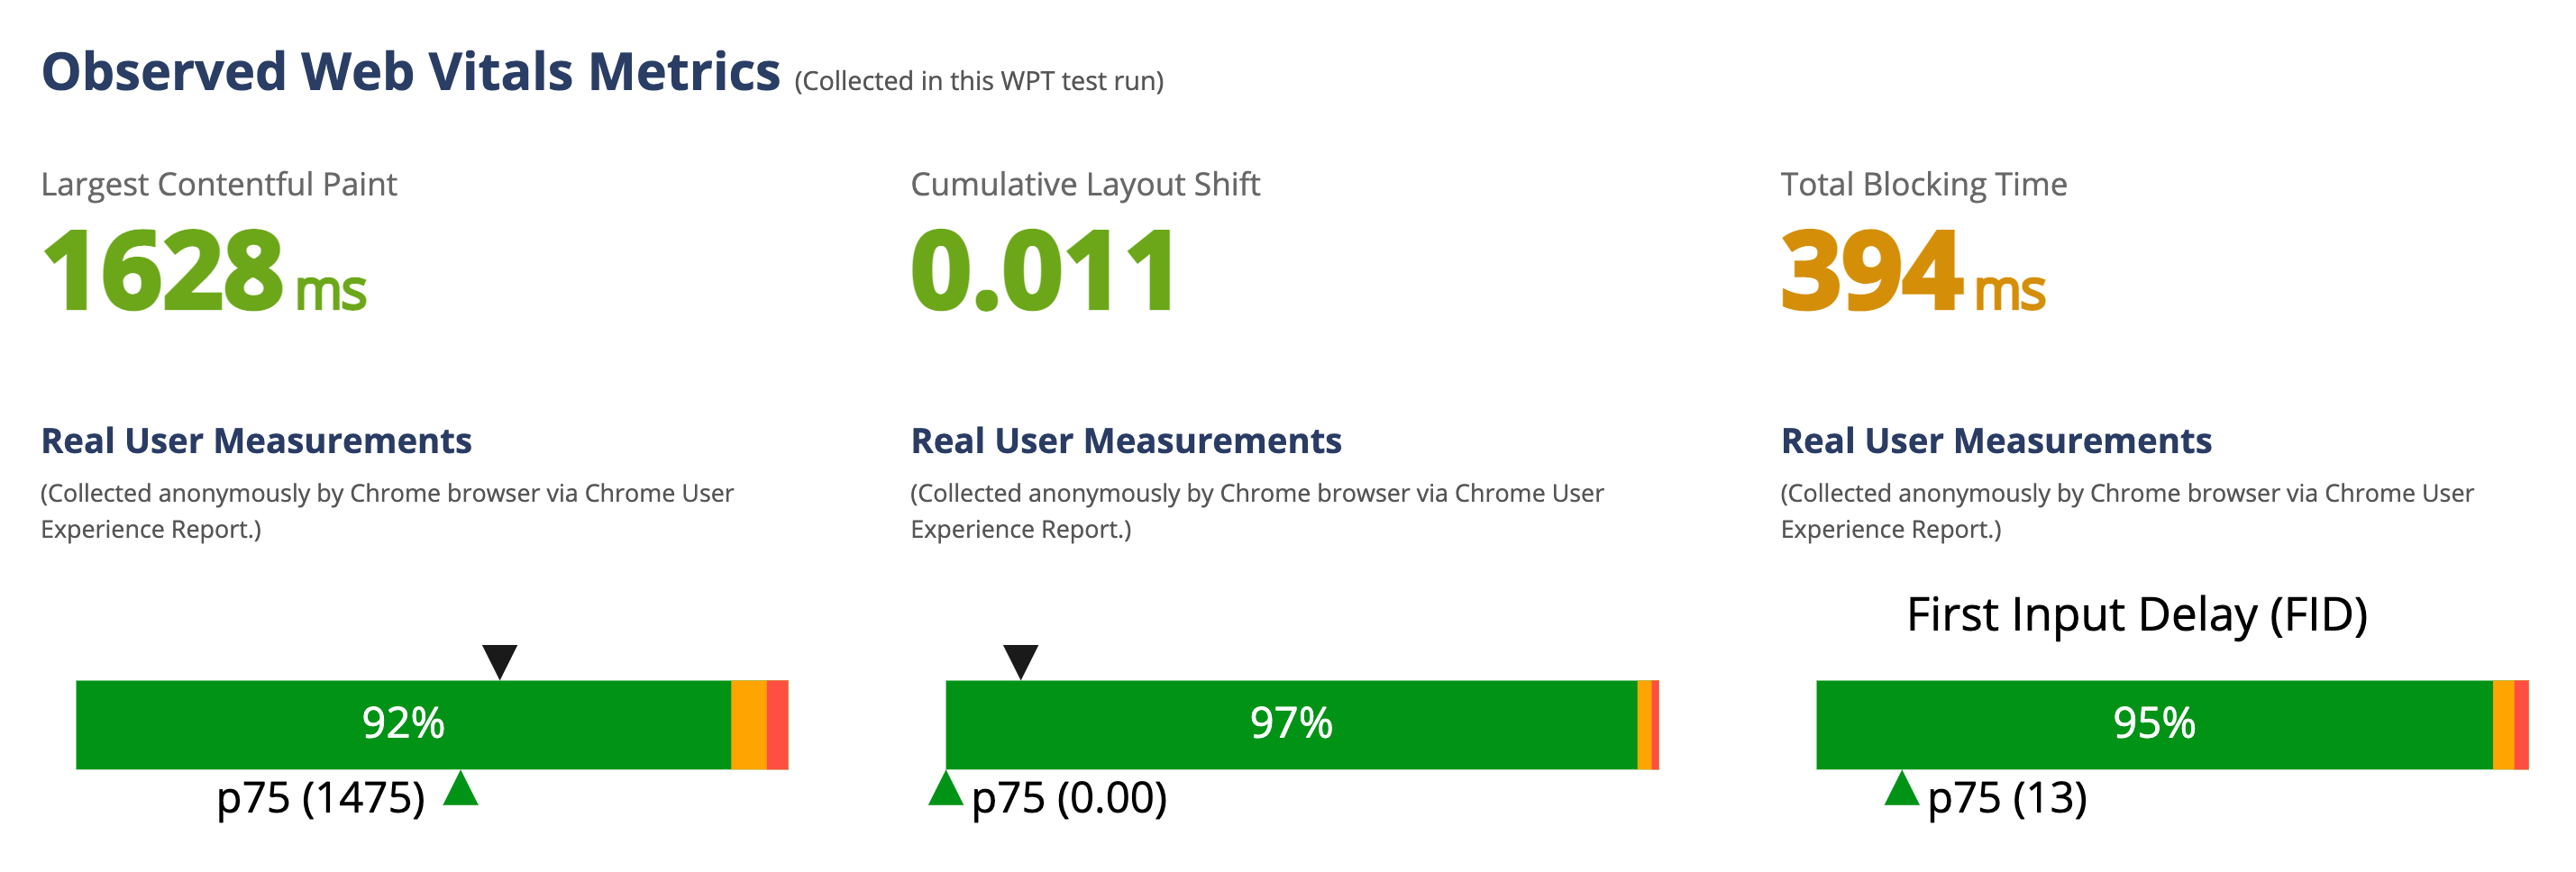 The Best Free Website Page Speed & Core Web Vitals Checker Tools